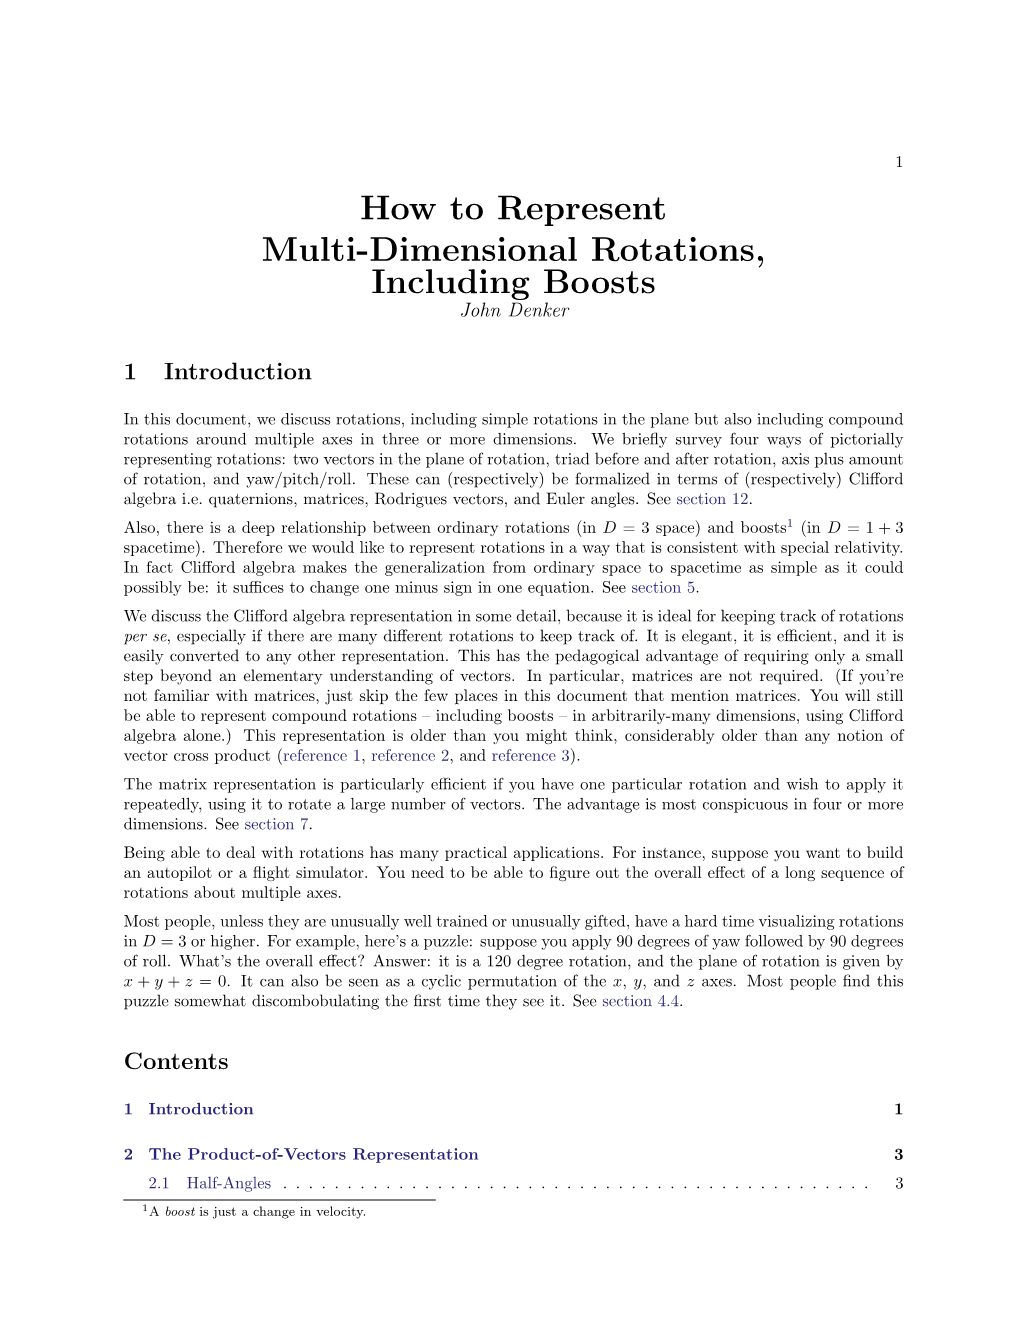 How to Represent Multi-Dimensional Rotations, Including Boosts John Denker